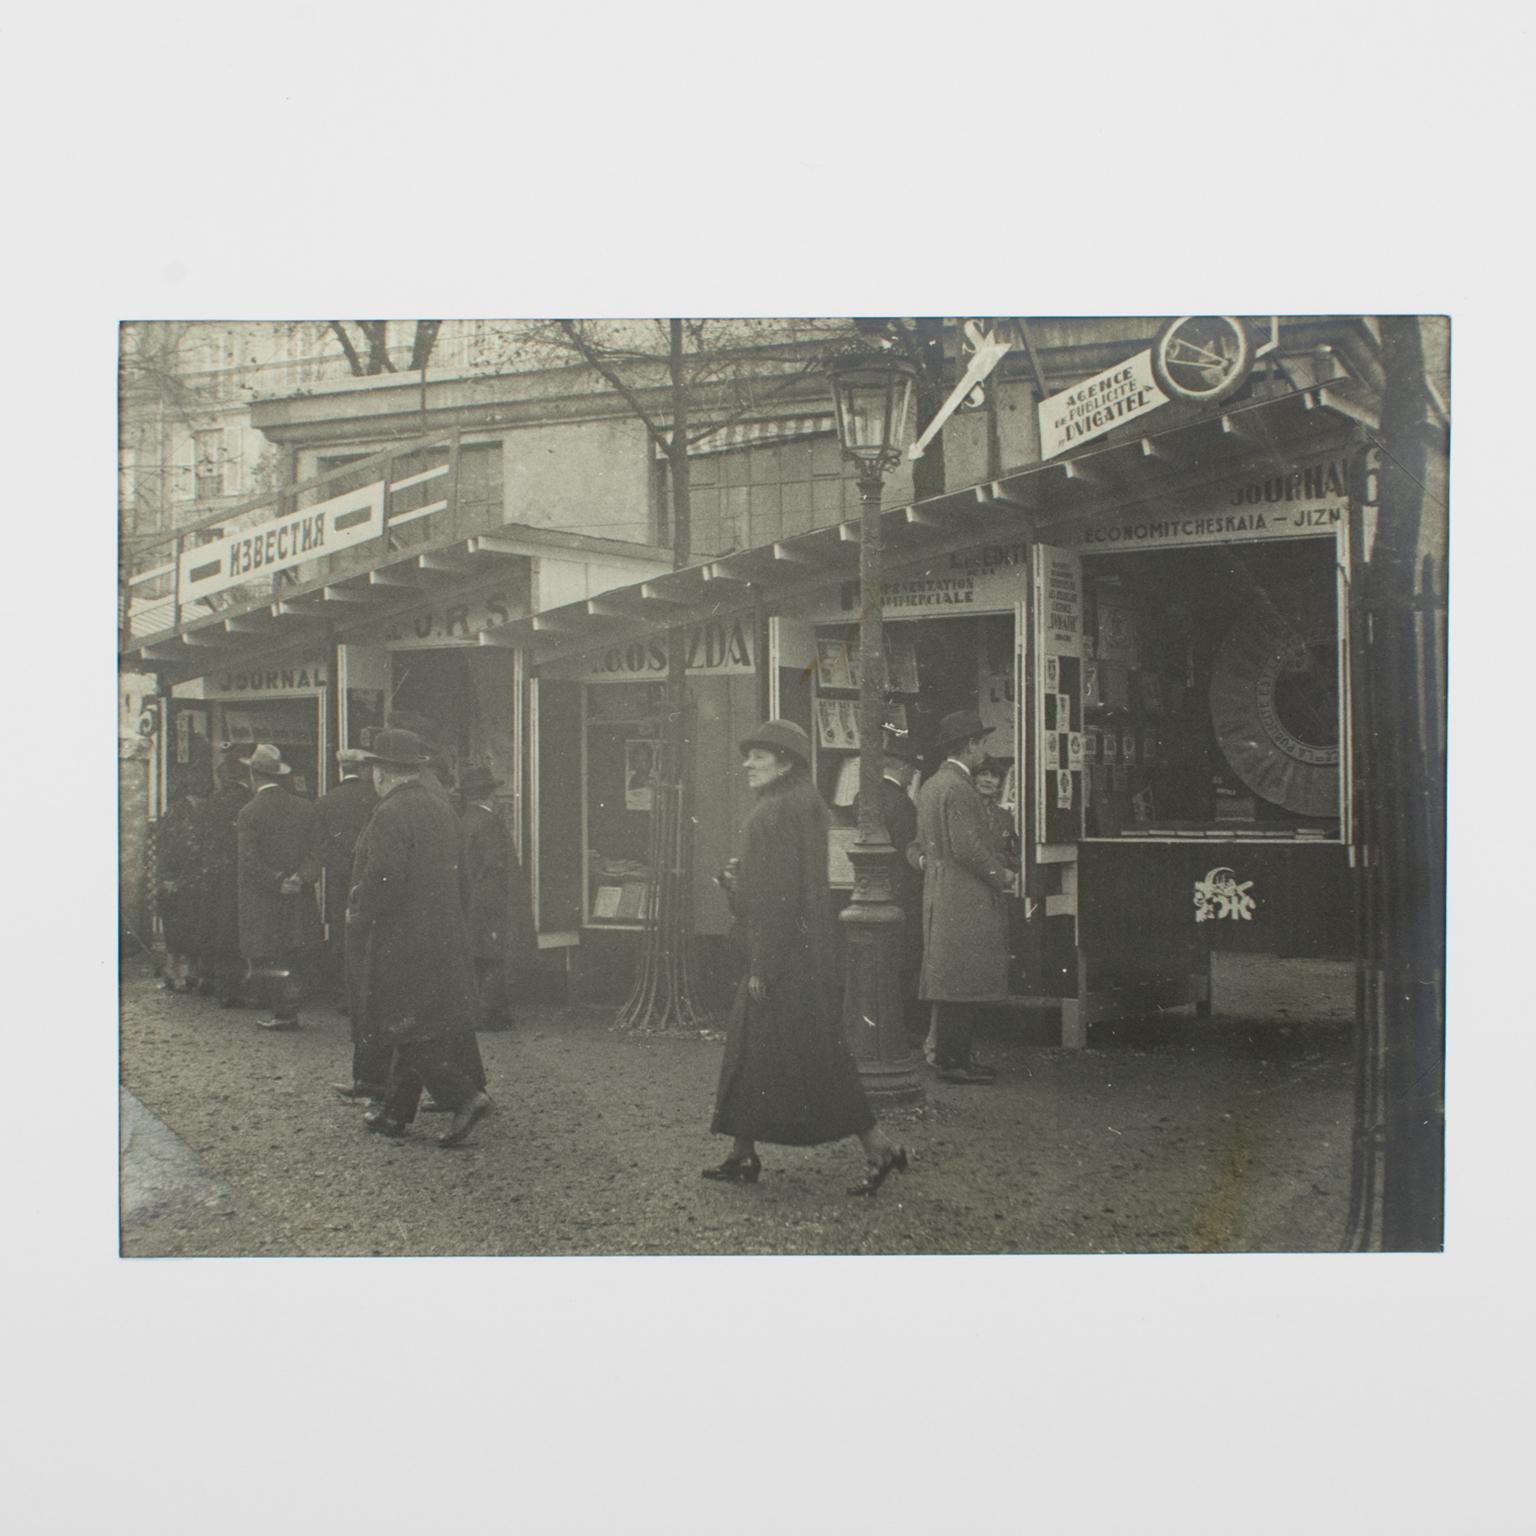 A unique original silver gelatin black and white photography.
International Decorative Arts Exhibition in Paris, October 1925. The view from inside the USSR Pavilion.
Features:
Original silver gelatin print photography unframed.
Press